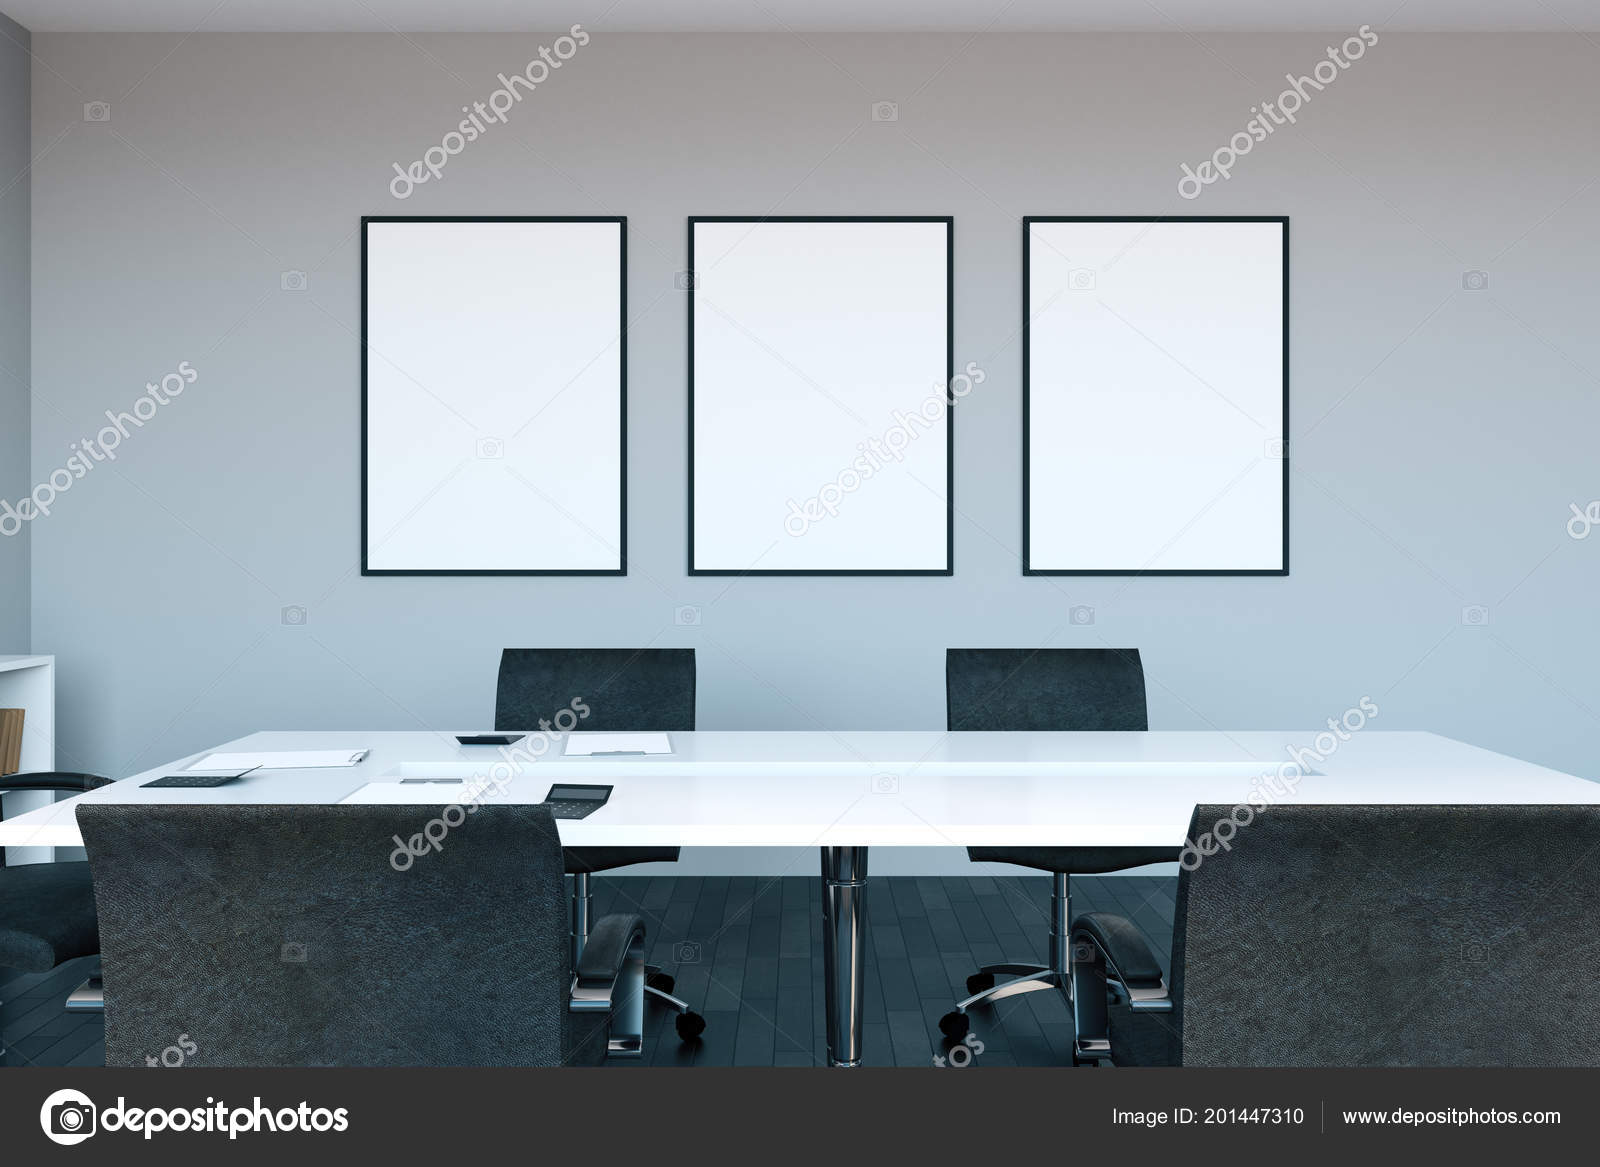 Modern Office Meeting Room Interior Empty Poster Concrete